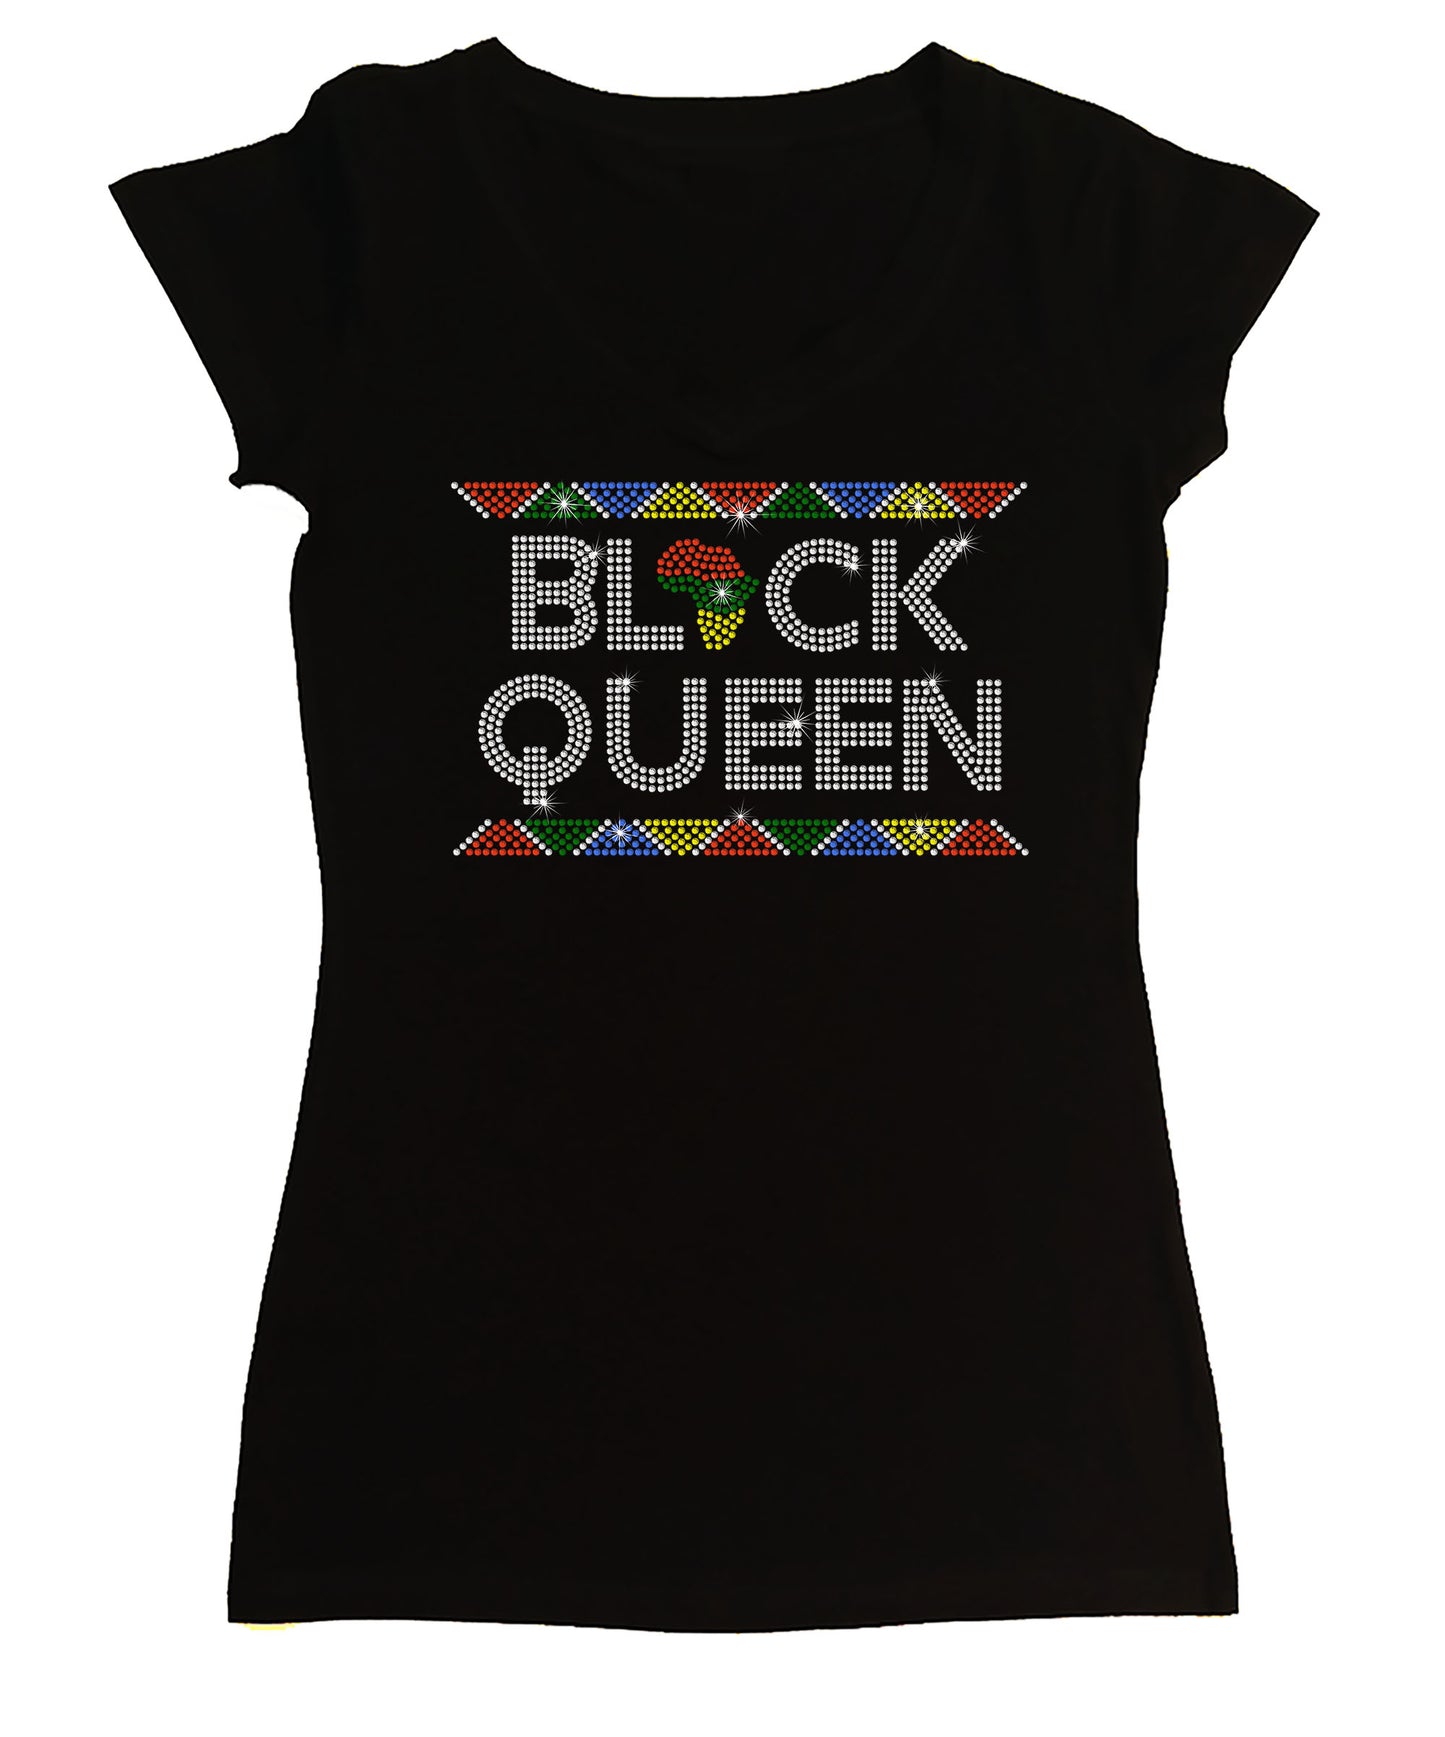 Women's Rhinestone Fitted Tight Snug Black Queen - in African Colors Border Rhinestone Shirt